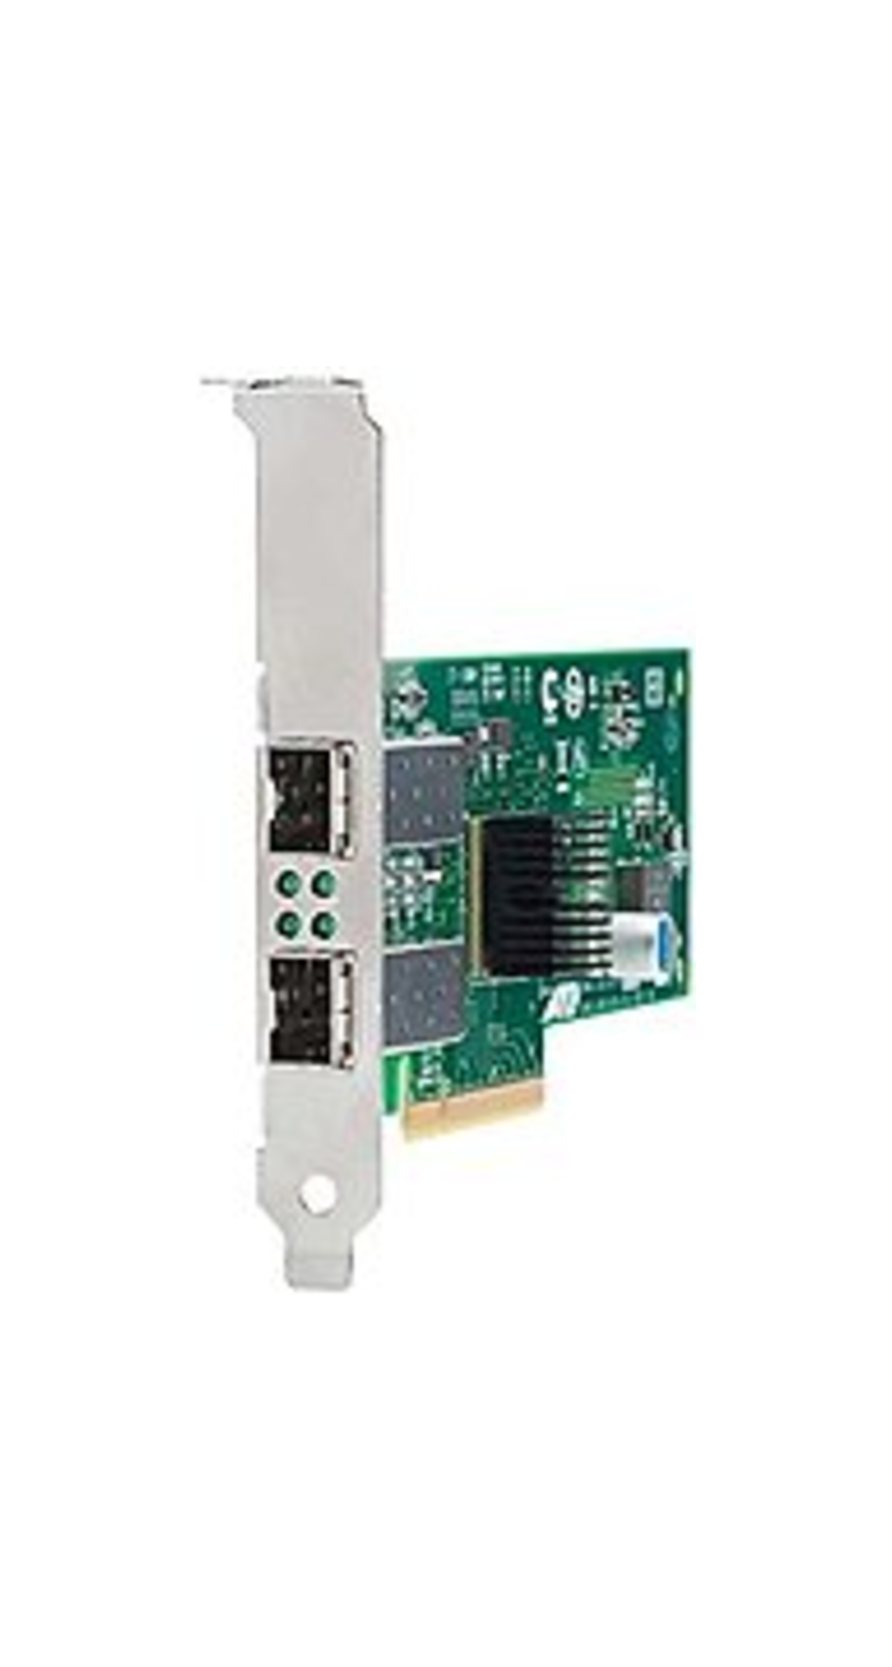 Allied Telesis AT-ANC10S/2-901 Plug-In-Card Network Adapter - - PCI Express 2.0 x8 - 2 x 10 Gigabit SFP+